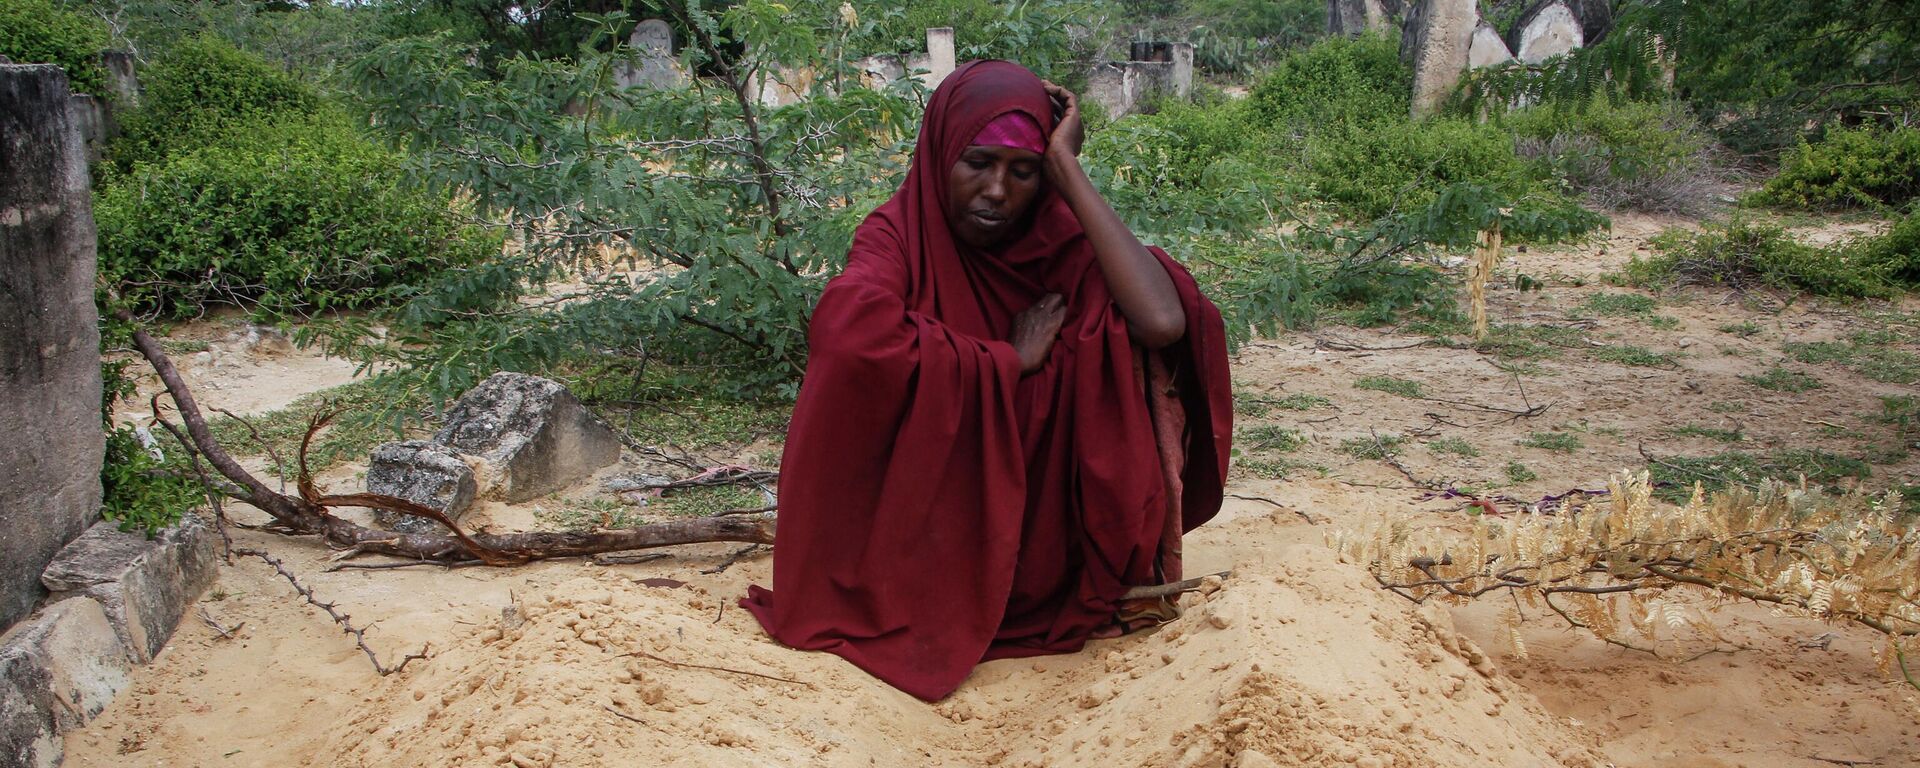 Fatuma Abdi Aliyow sits by the graves of her two sons who died of malnutrition-related diseases last week, at a camp for the displaced on the outskirts of Mogadishu, Somalia, Sept. 3, 2022. - Sputnik International, 1920, 10.12.2022